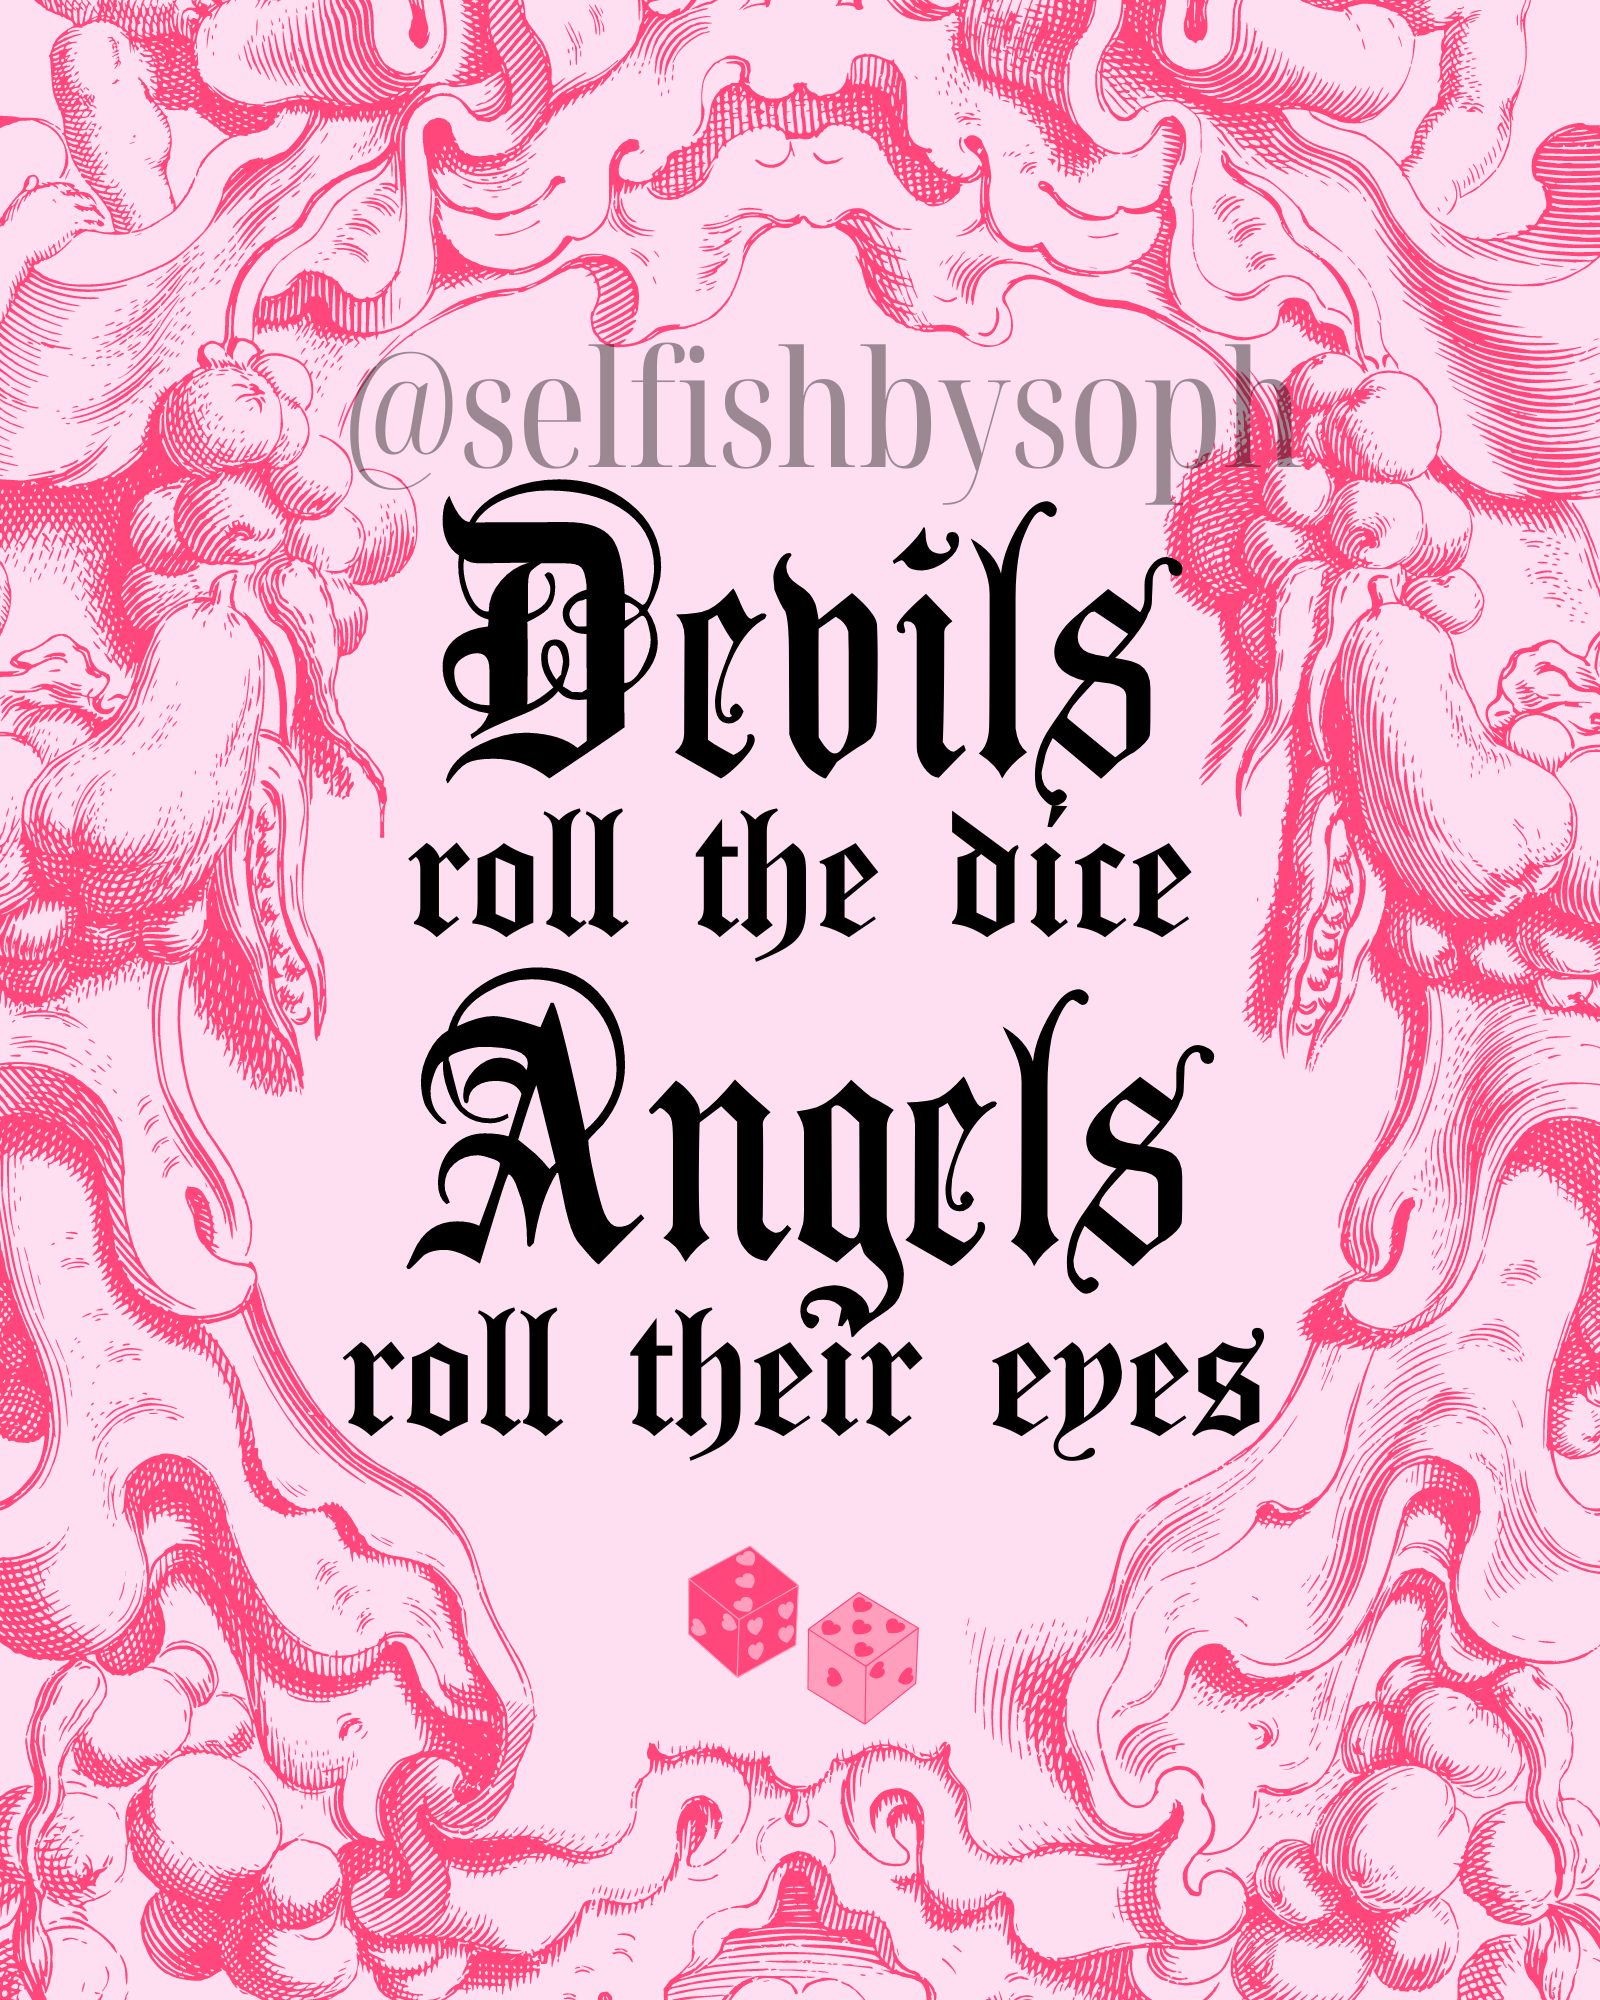 Devils Roll The Dice Print